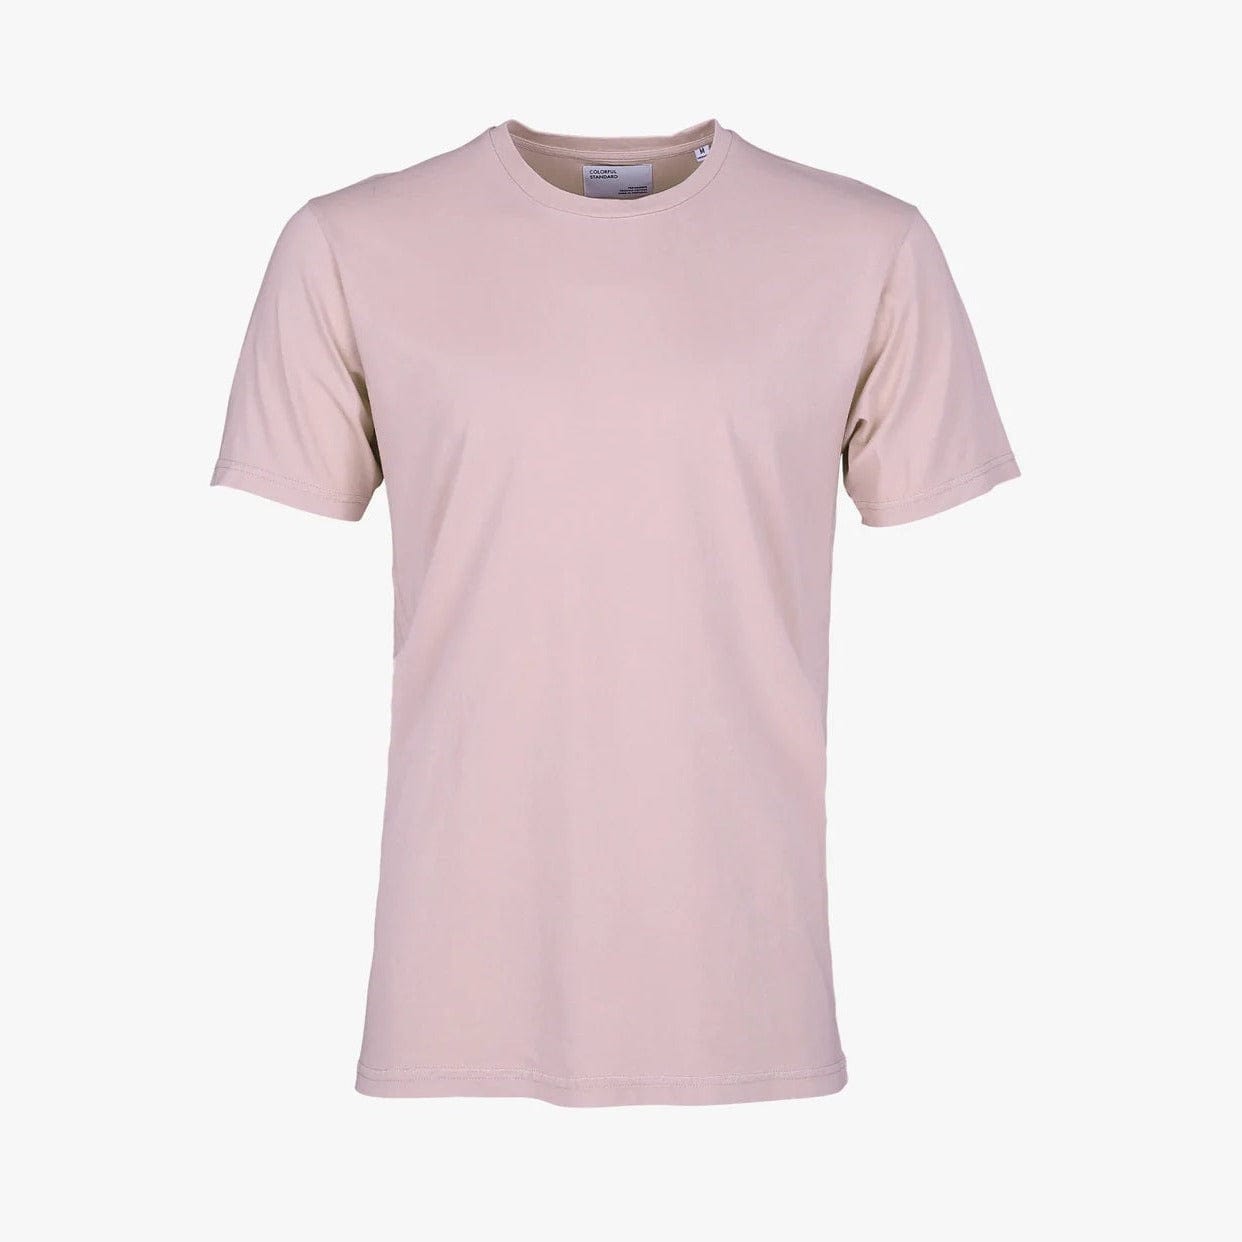 Colorful Standard Classic Organic Tee Faded Pink Unisex